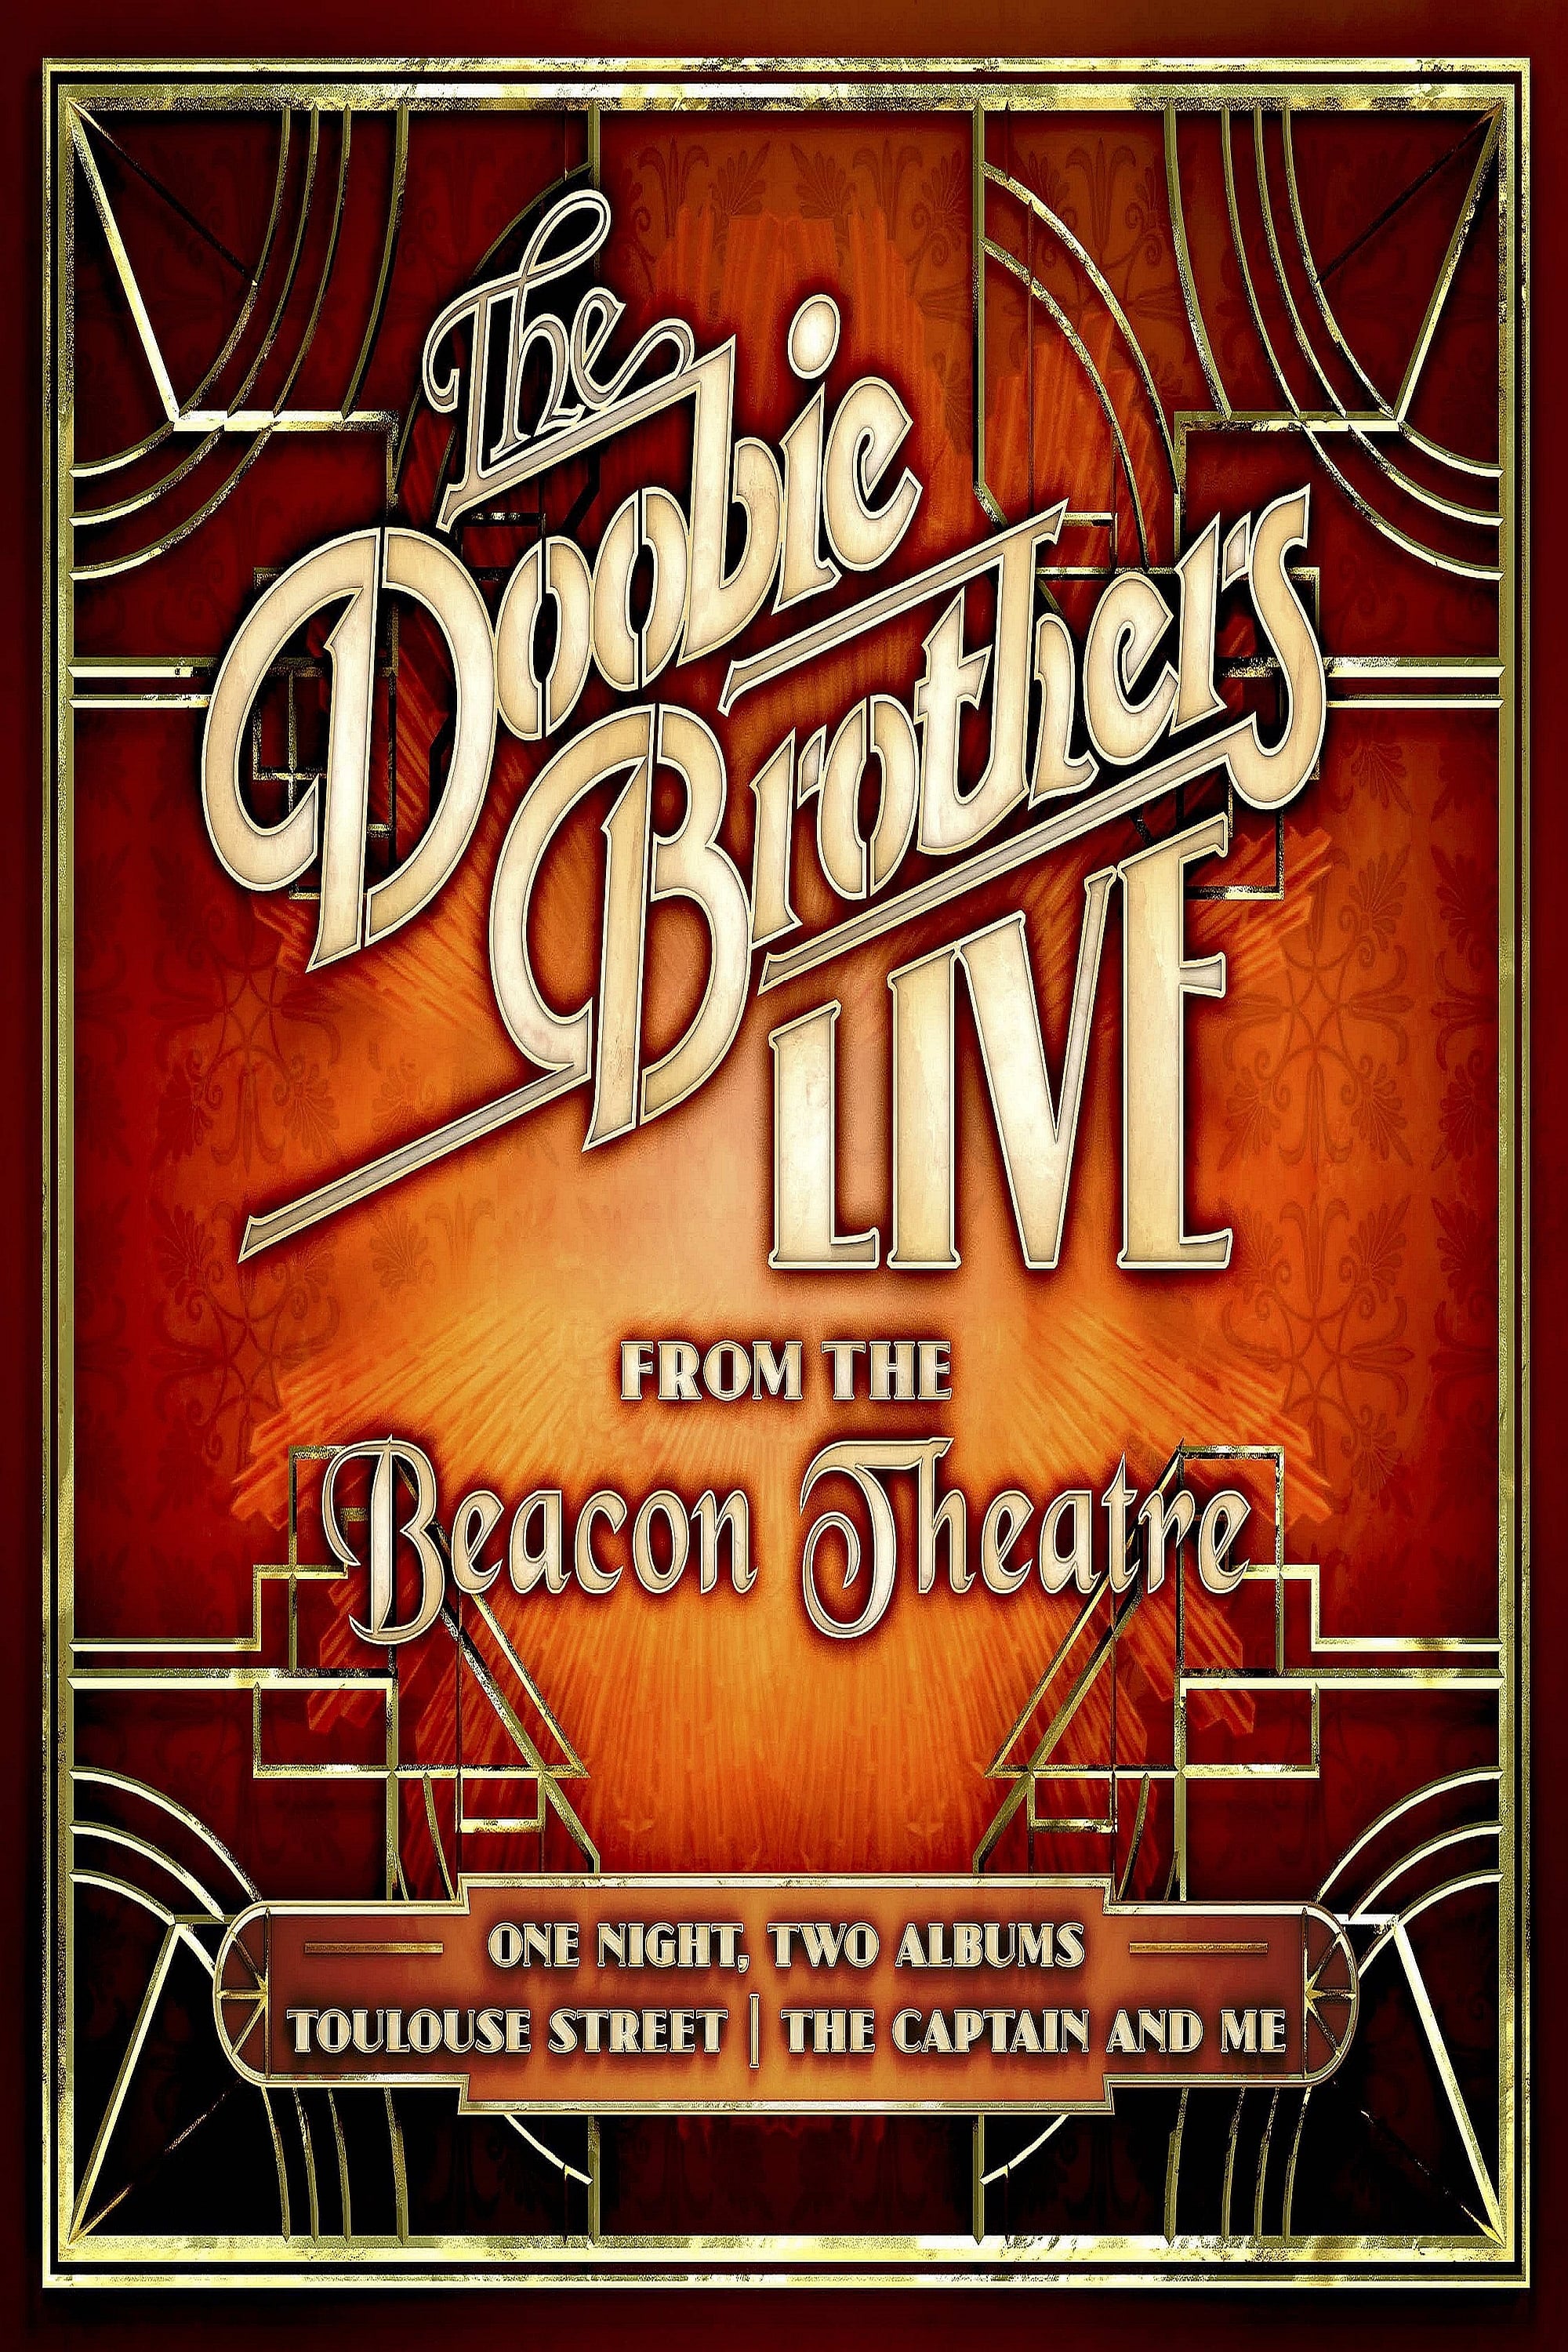 The Doobie Brothers: Live from the Beacon Theatre